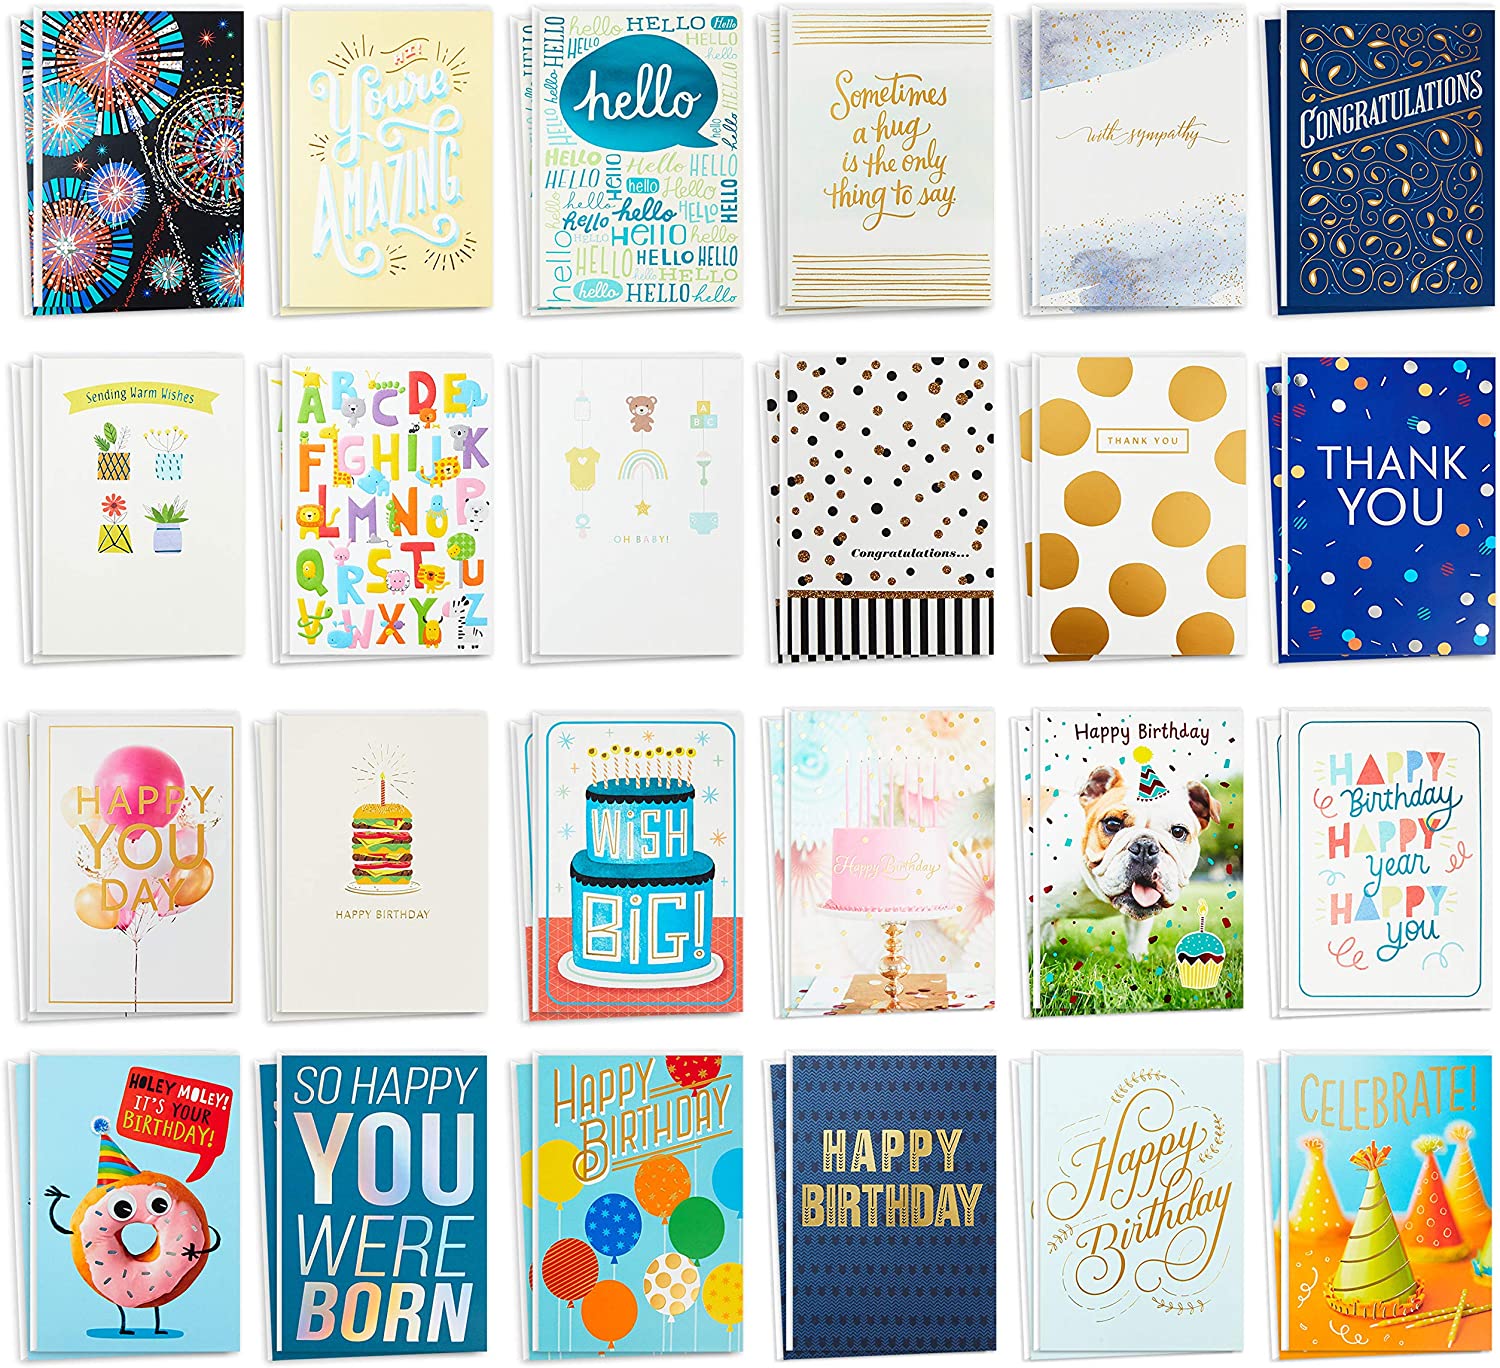 Hallmark, Hallmark All Occasion Cards Assortment 48 Cards with Envelopes (Birthday, Thank You, Congrats, Sympathy, Baby Shower, Blank), 5EDX1047